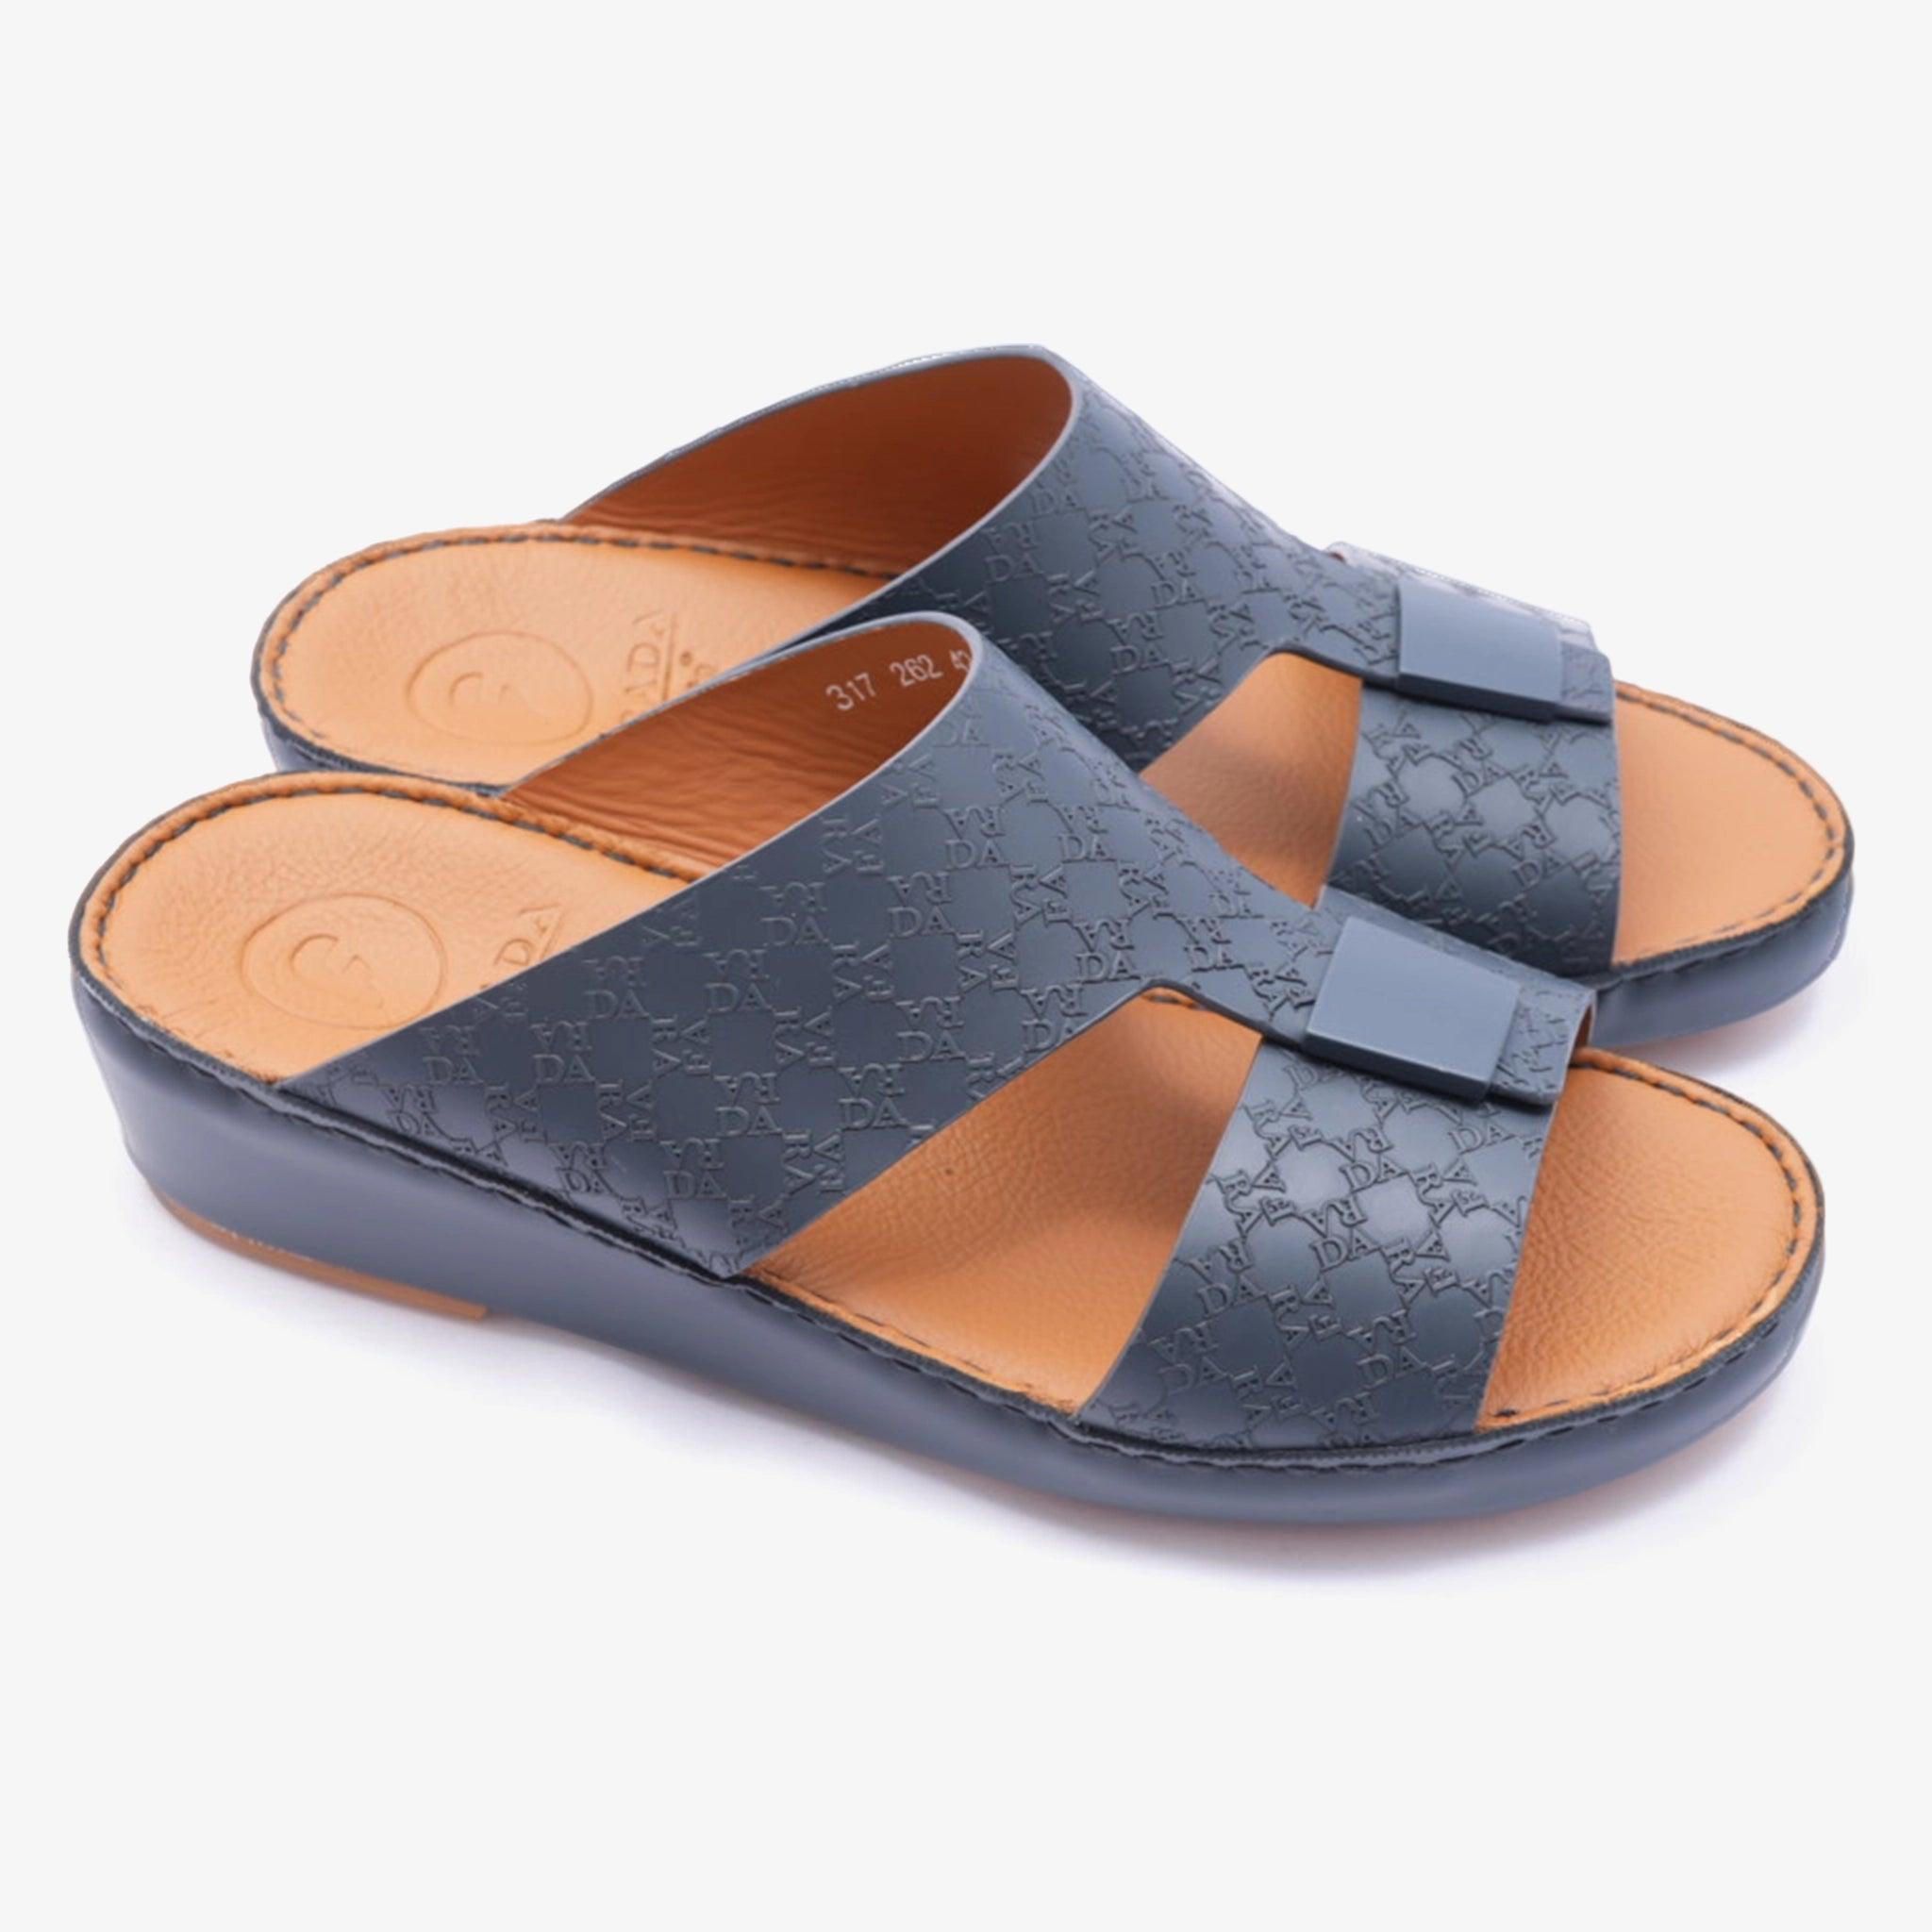 BUY ONLINE EXCLUSIVE COLLECTIONS OF ARABIC SANDALS - FARADA